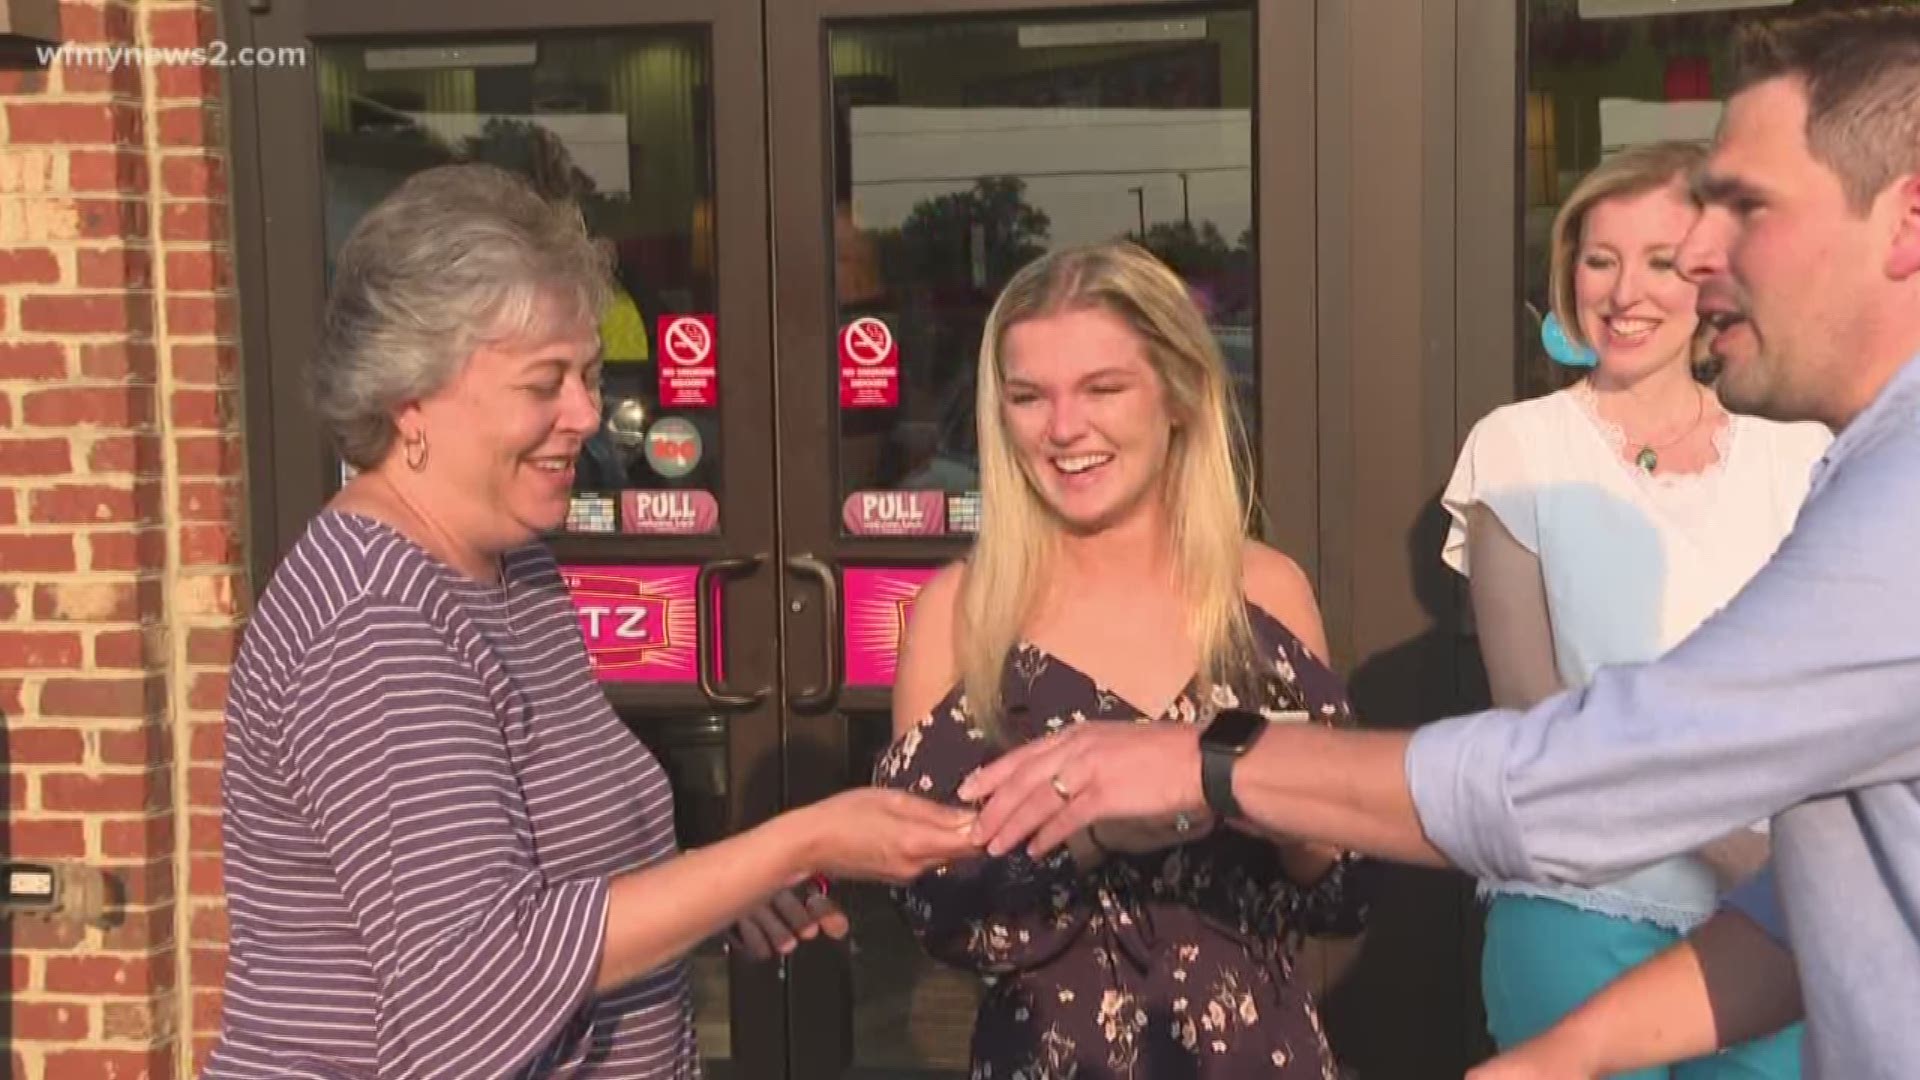 After helping a girl on her prom night, both strangers have been rewarded with free gas from Sheetz for a year